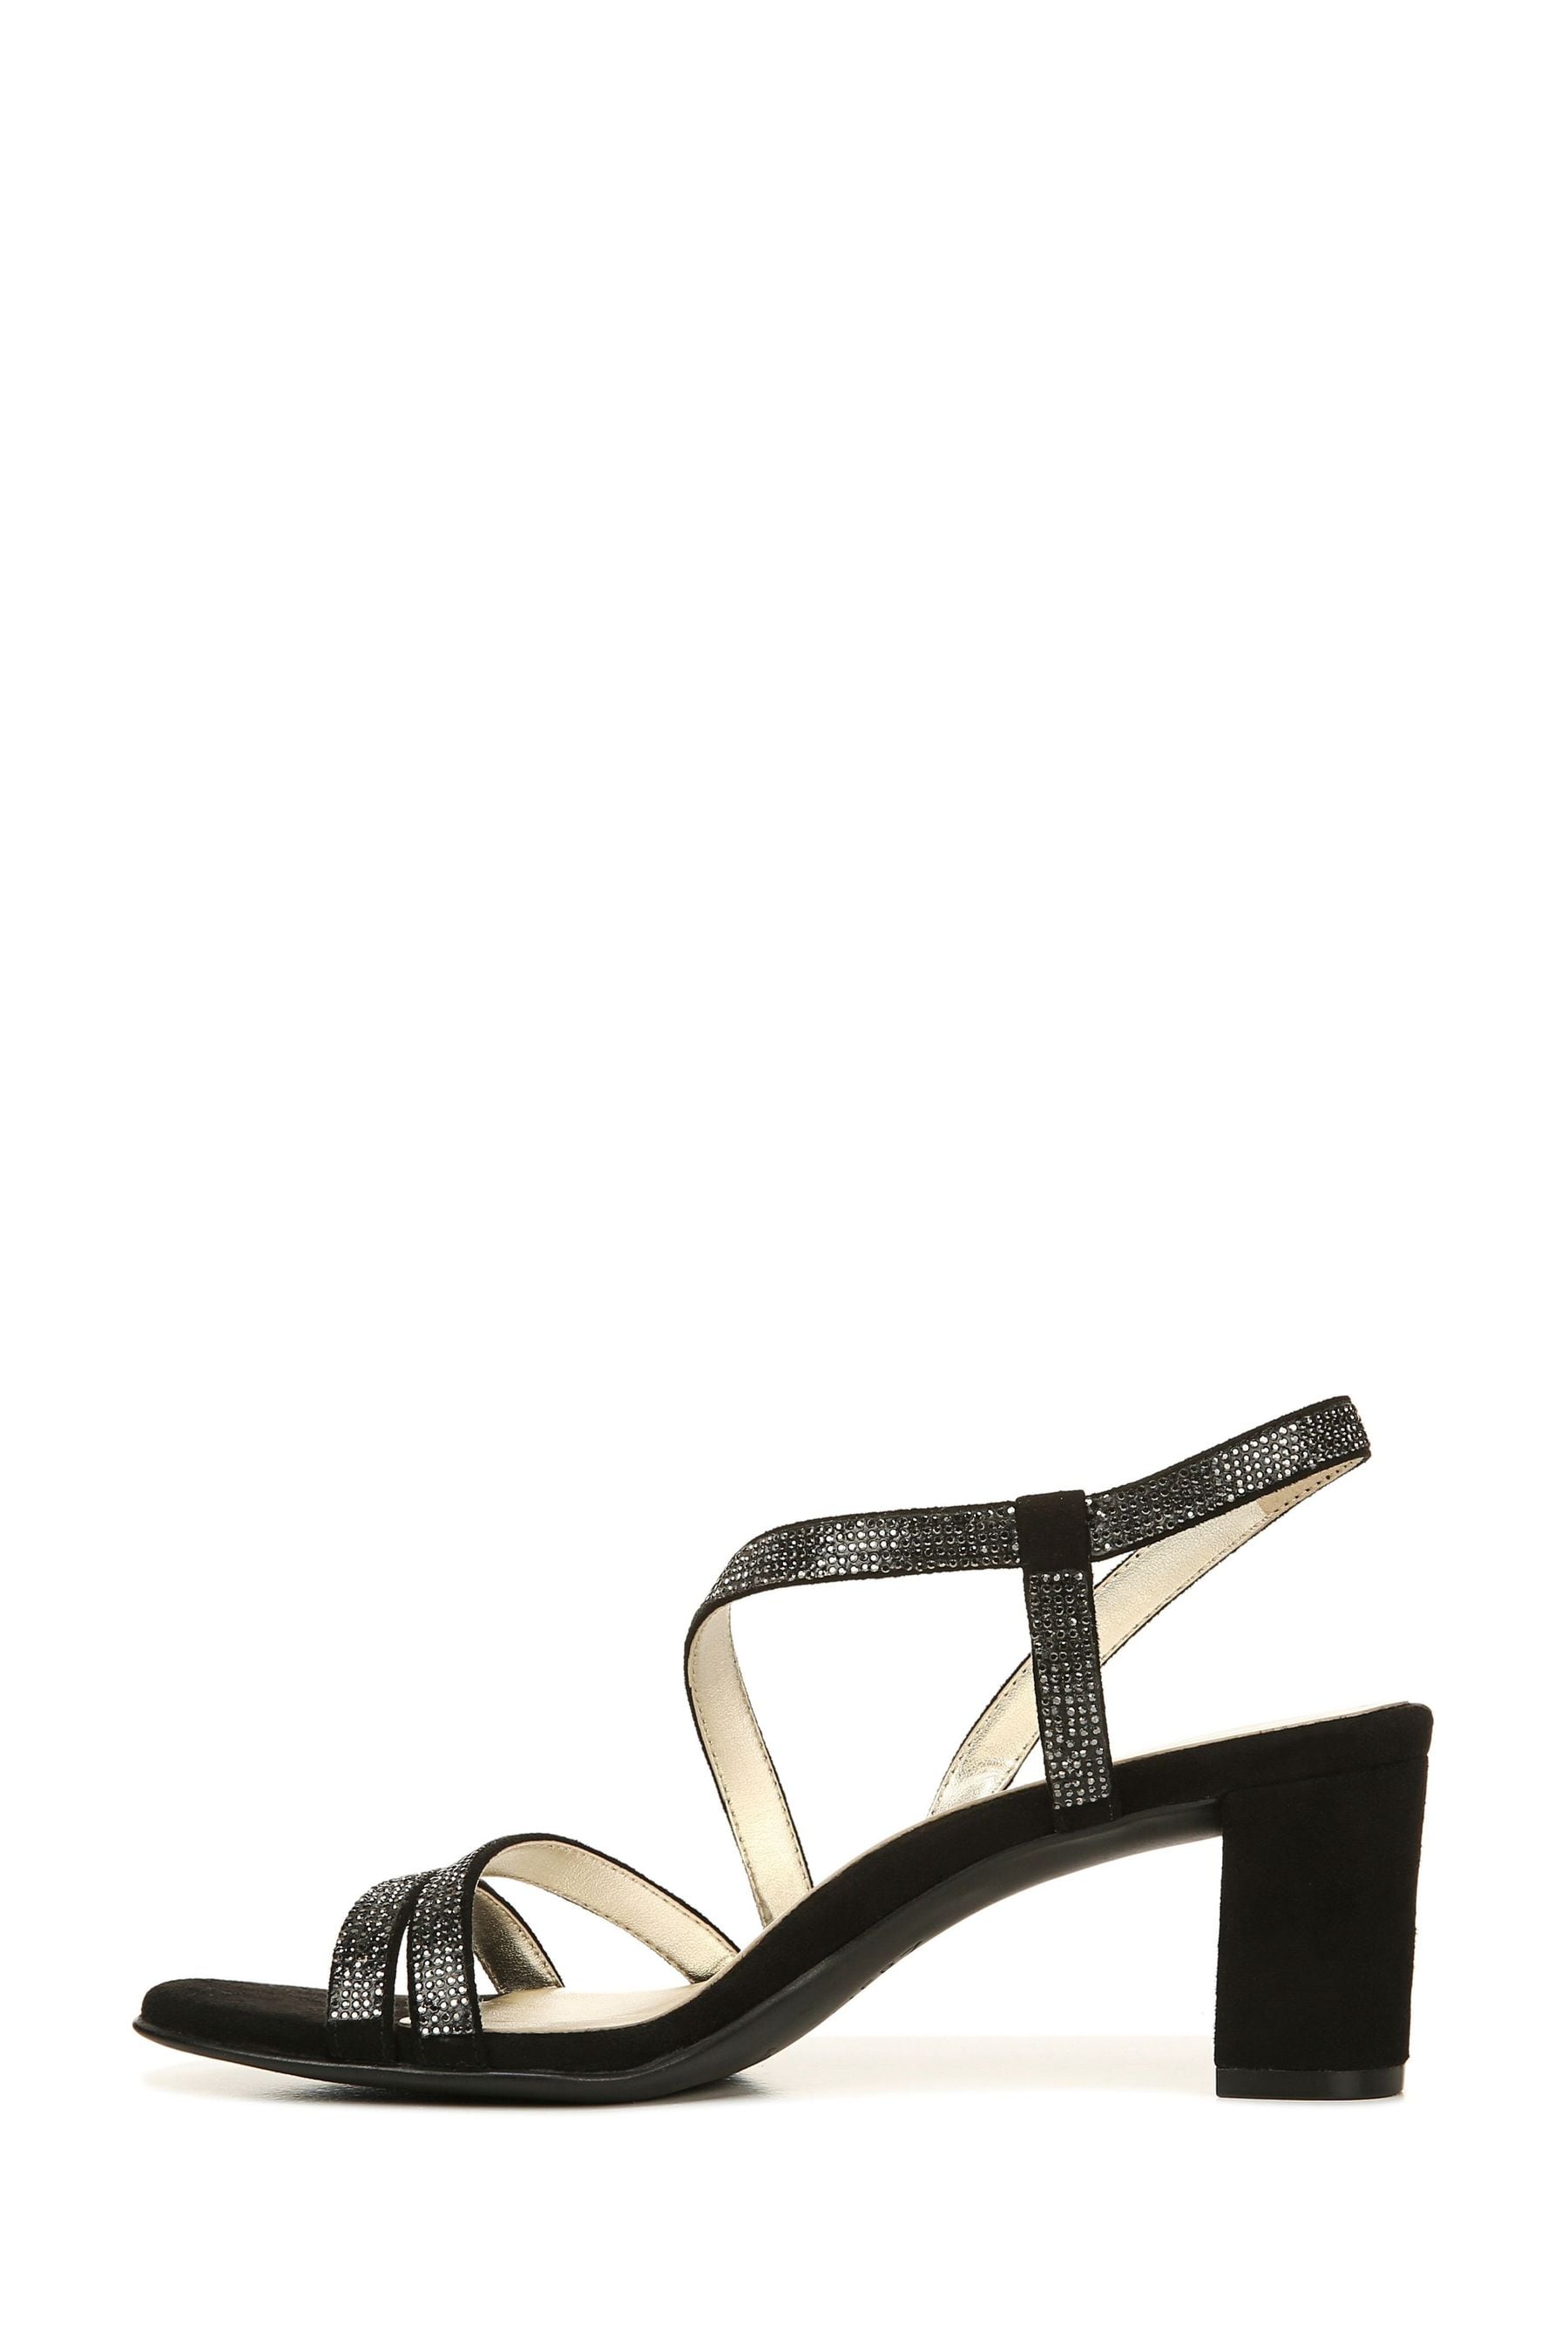 Buy Naturalizer Vanessa Strappy Sandals from the Next UK online shop